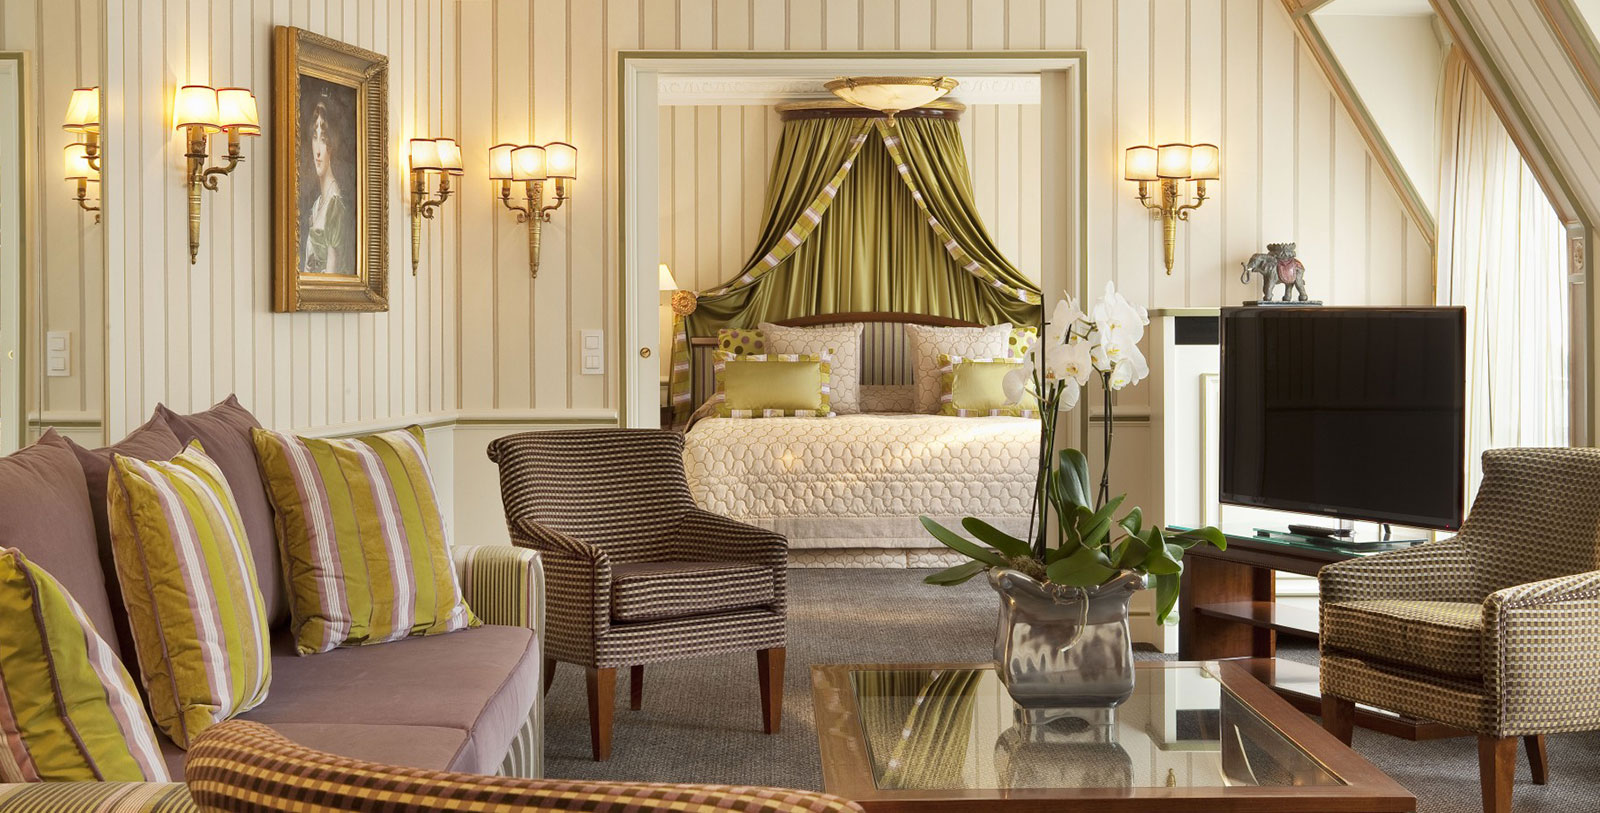 Discover historic accommodations at the Hotel Napoleon Paris.